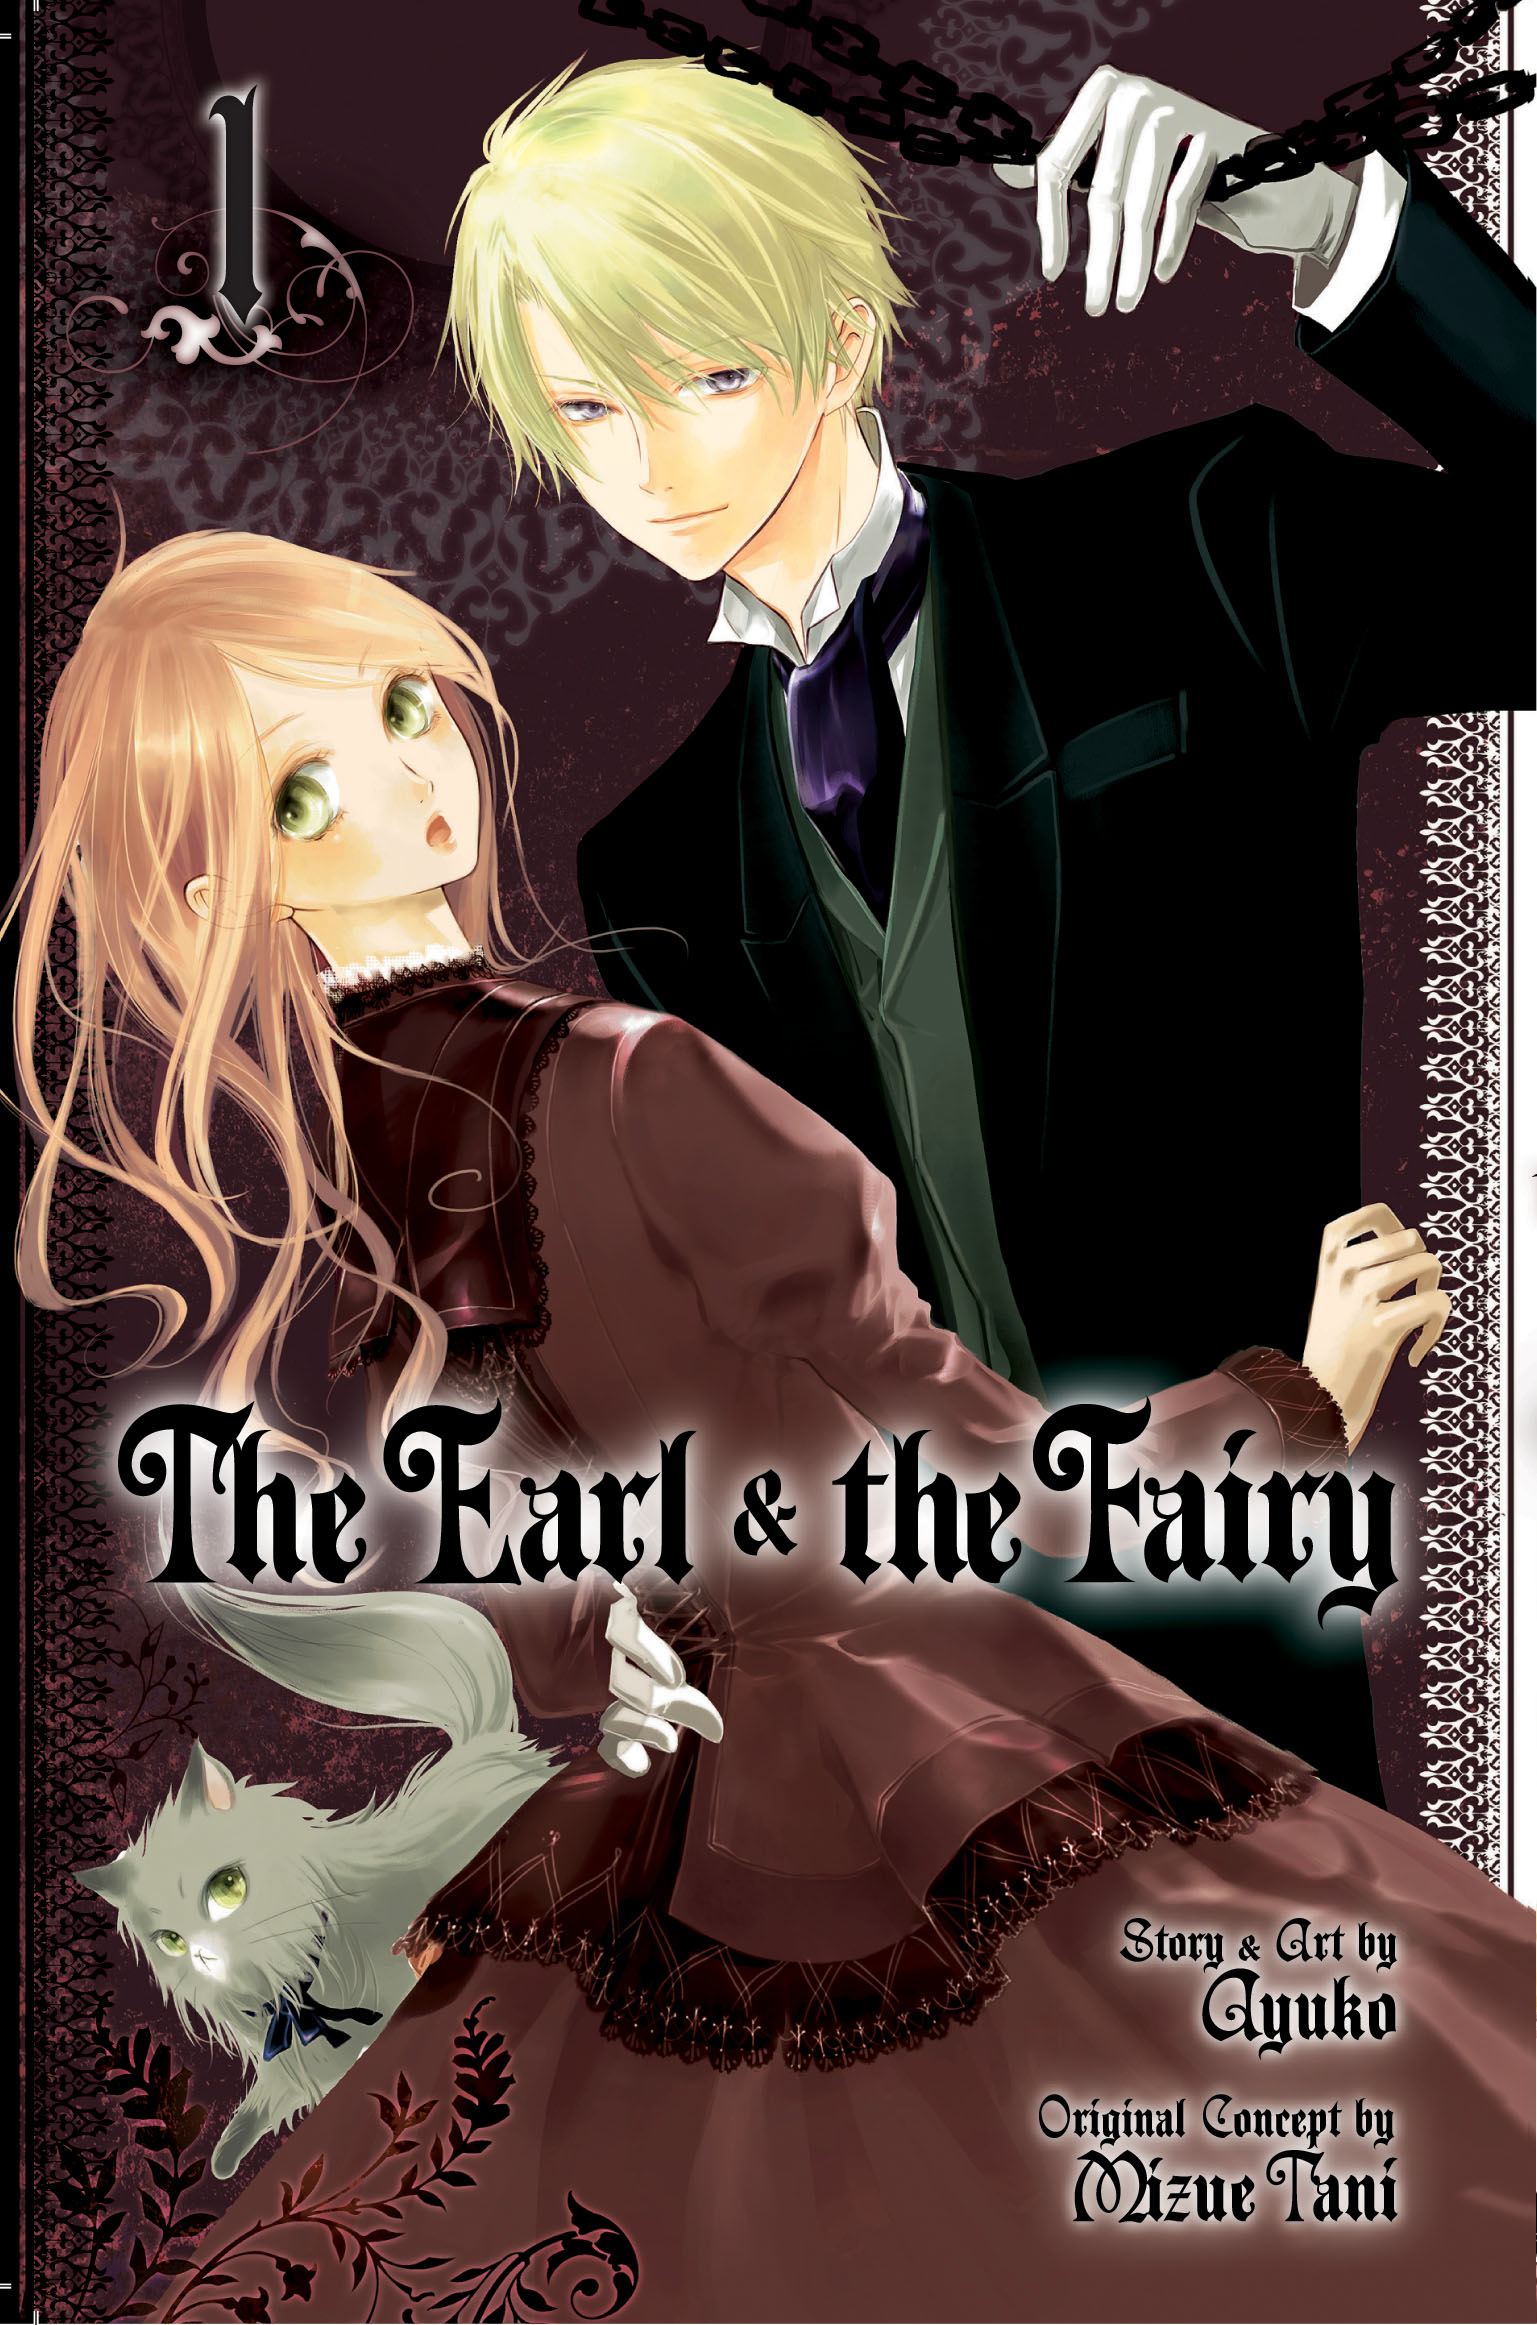 Product Image: The Earl and The Fairy, Vol. 1